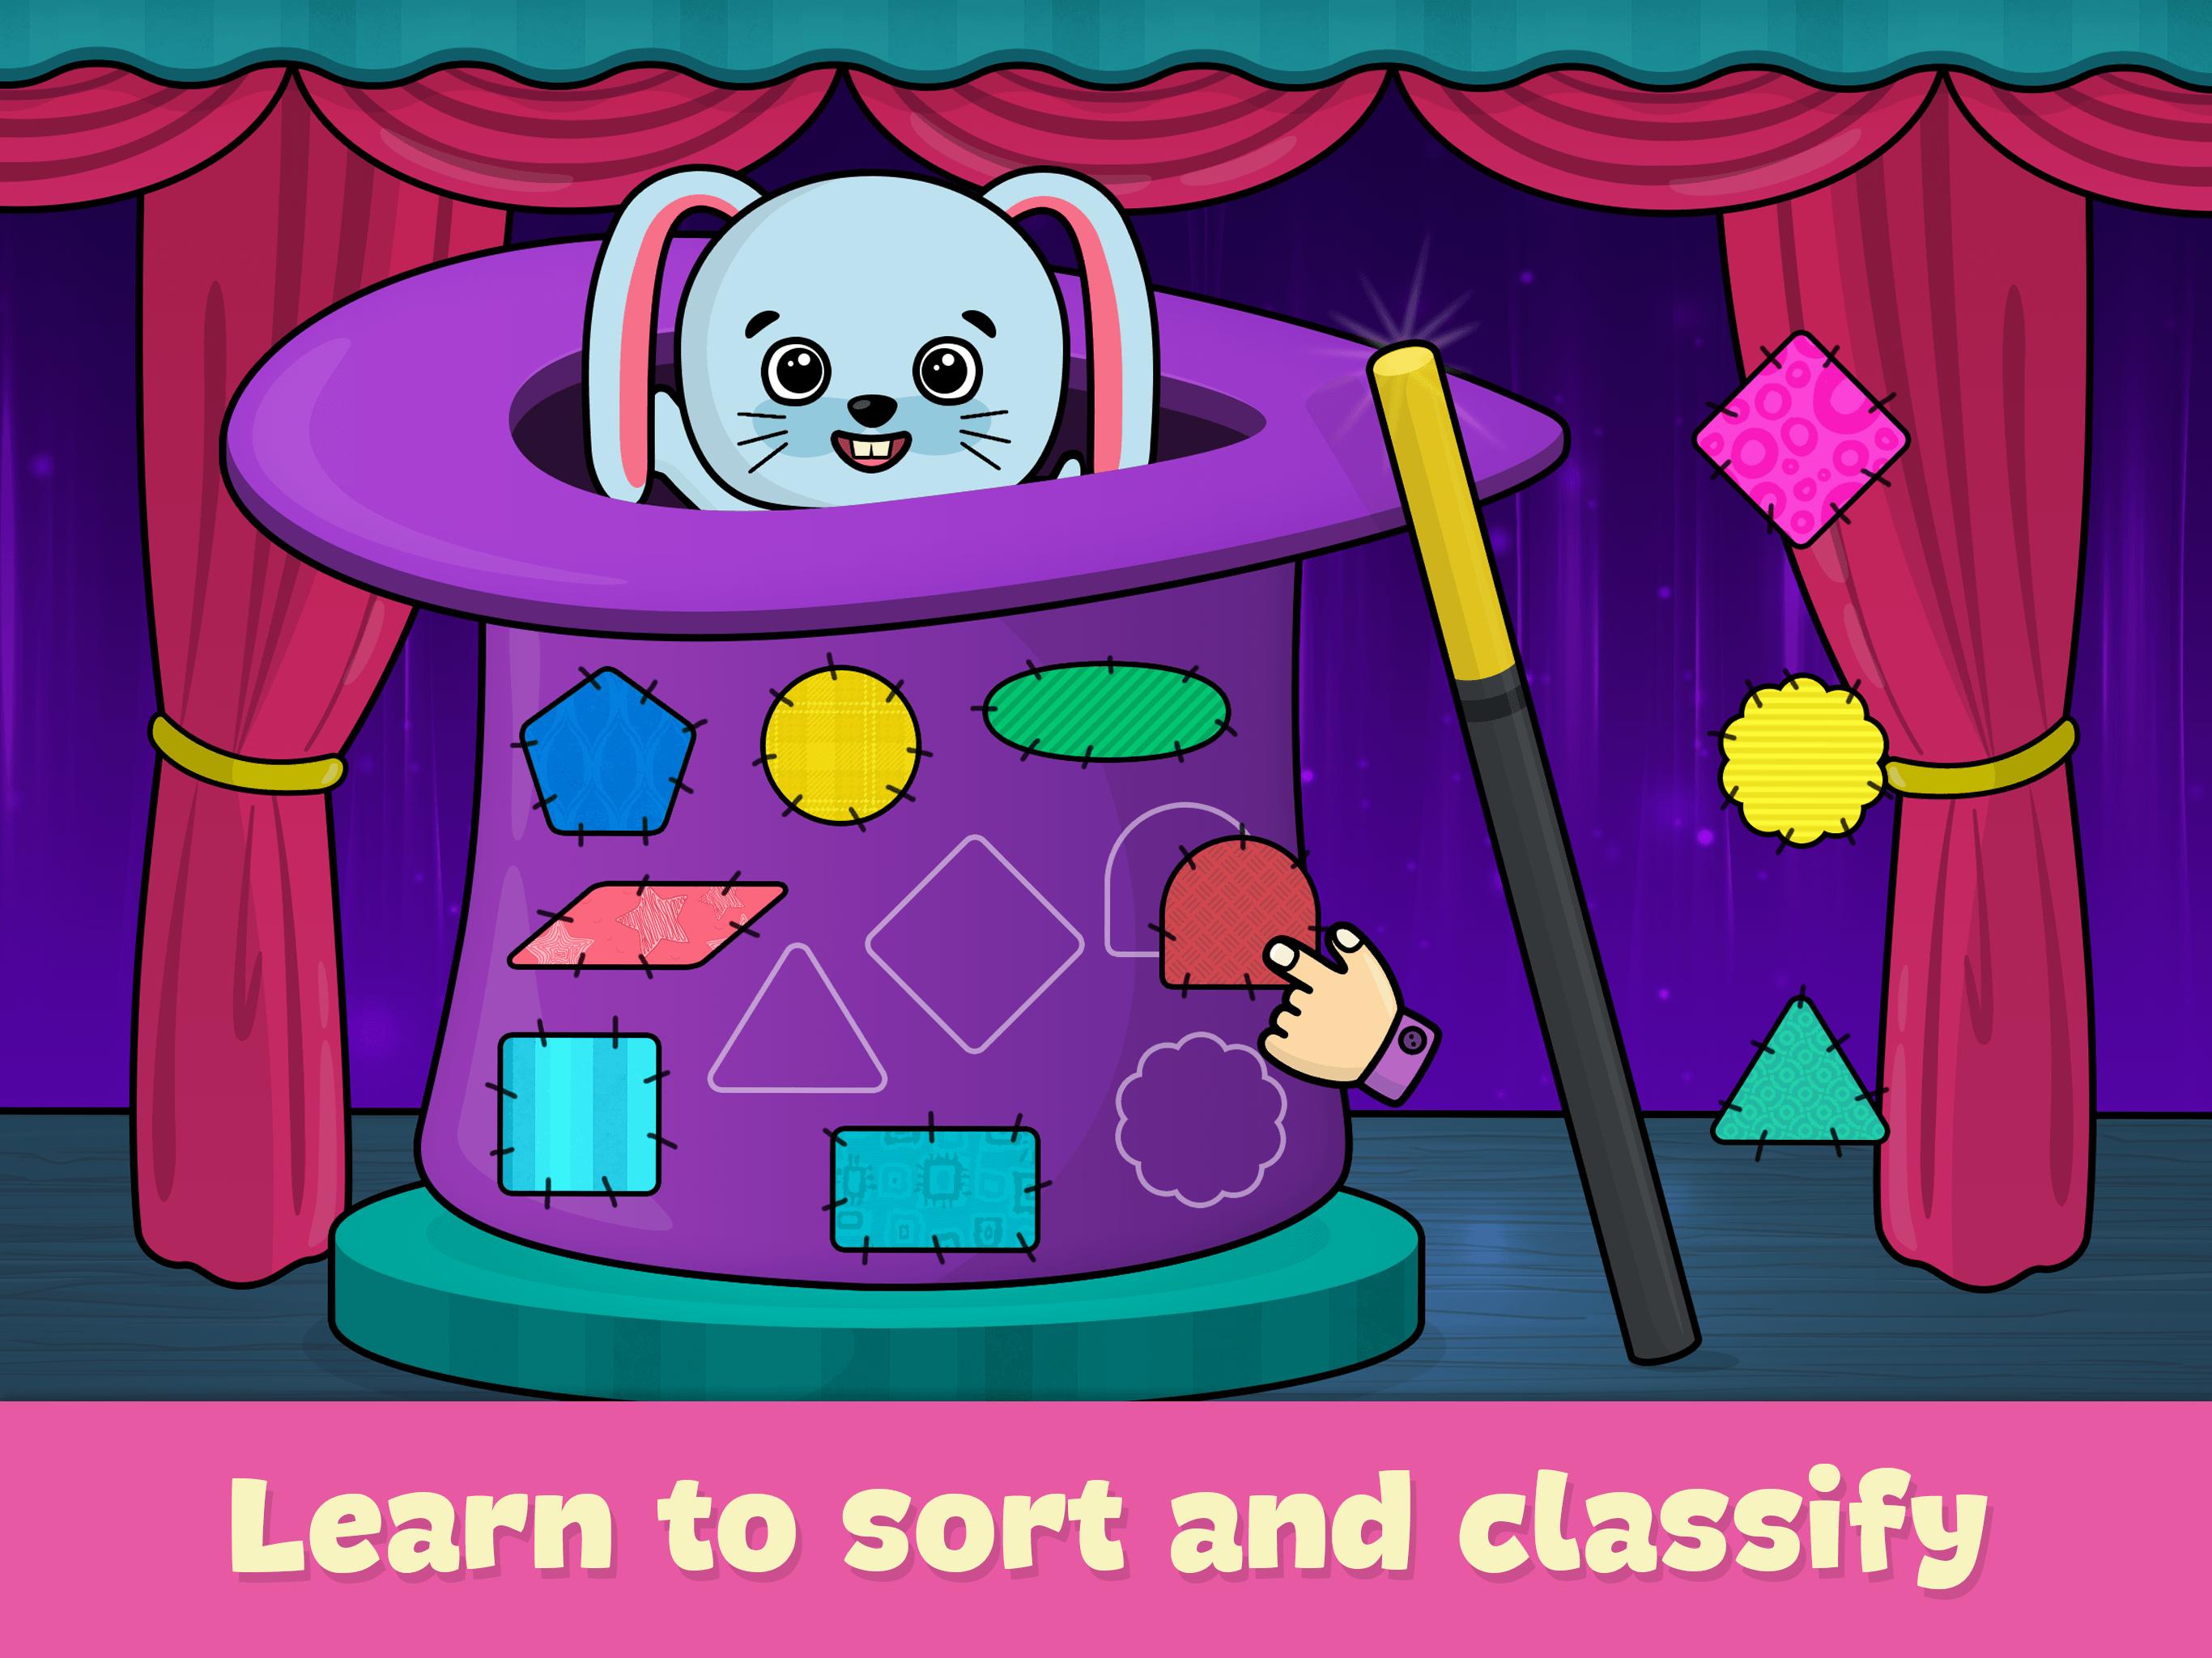 Toddler games for Android - APK Download